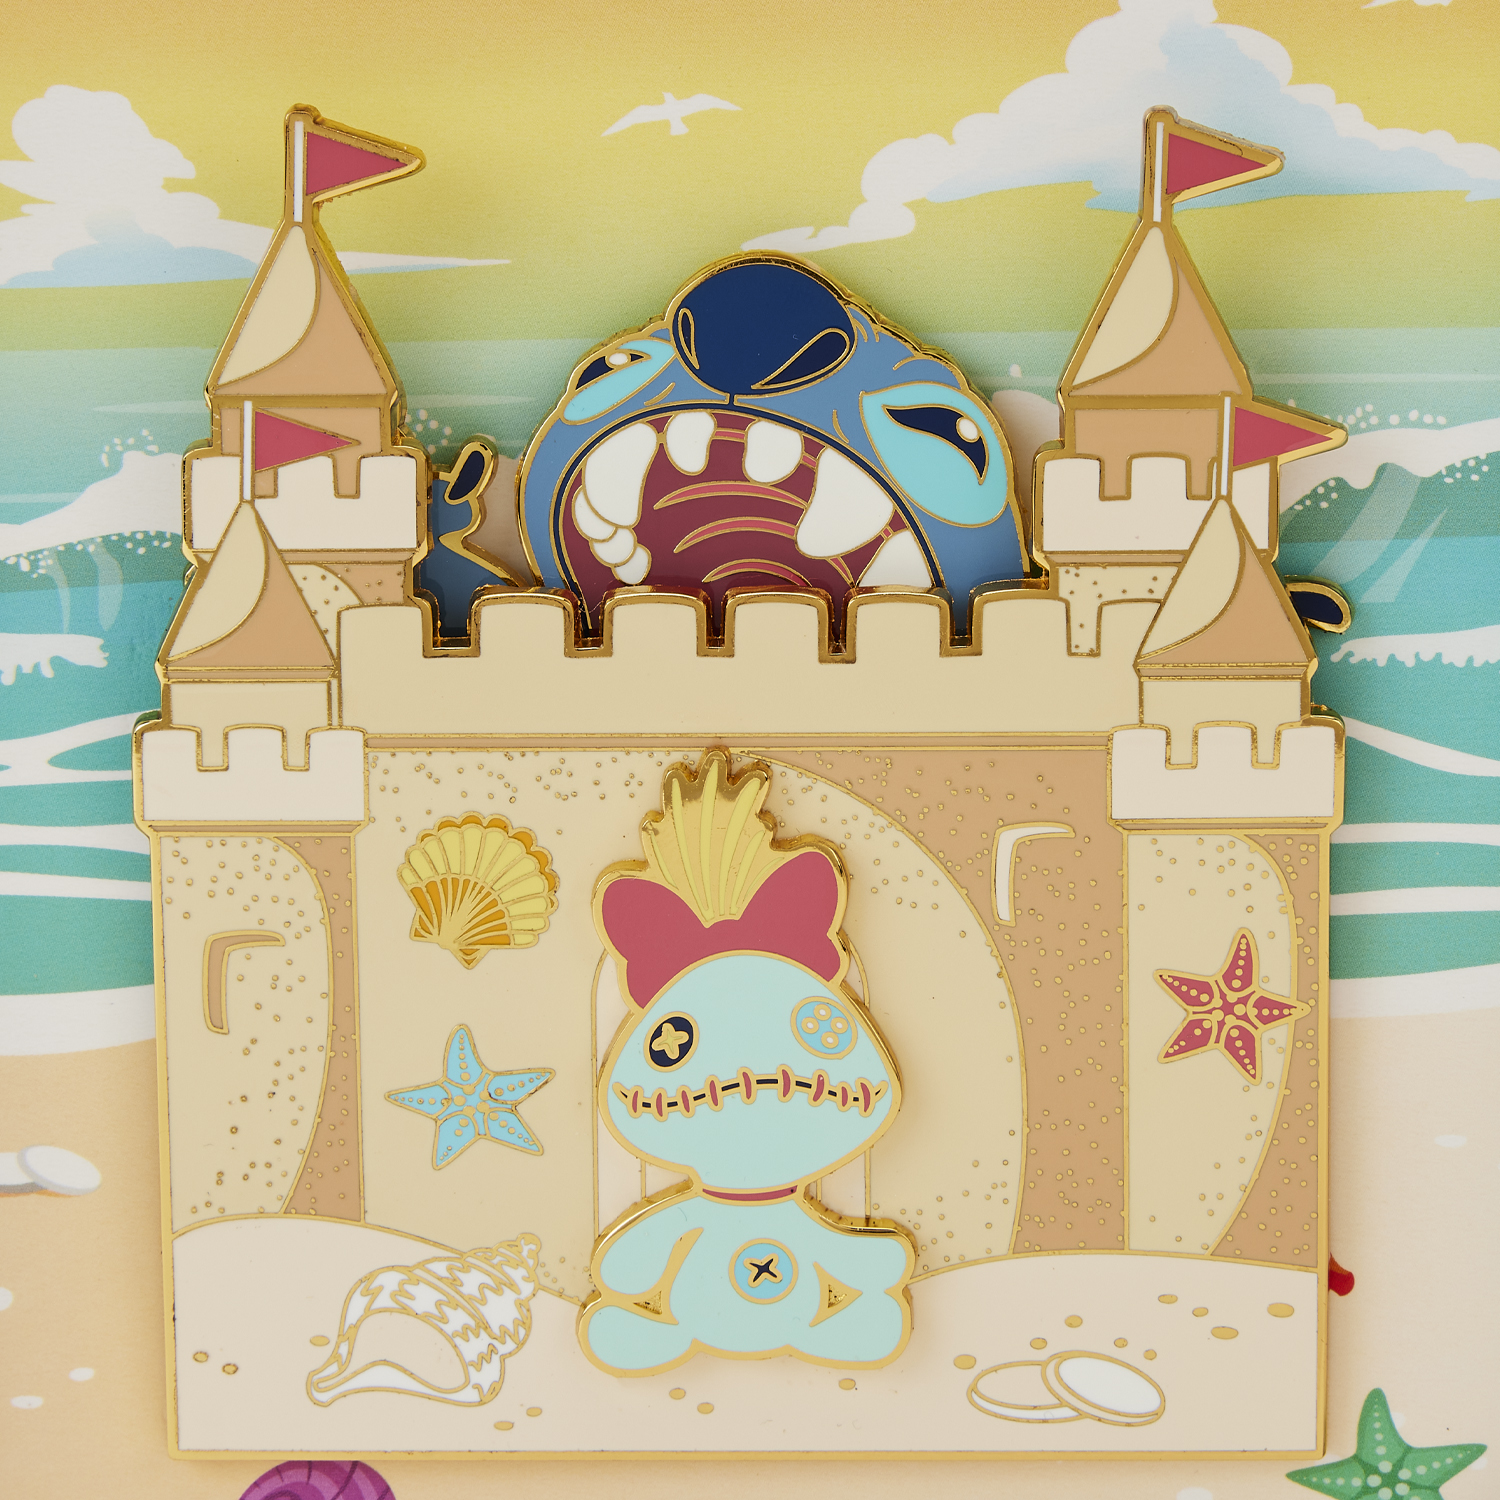 Buy Stitch Sandcastle Beach Surprise 3 Collector Box Pin At Loungefly 0424